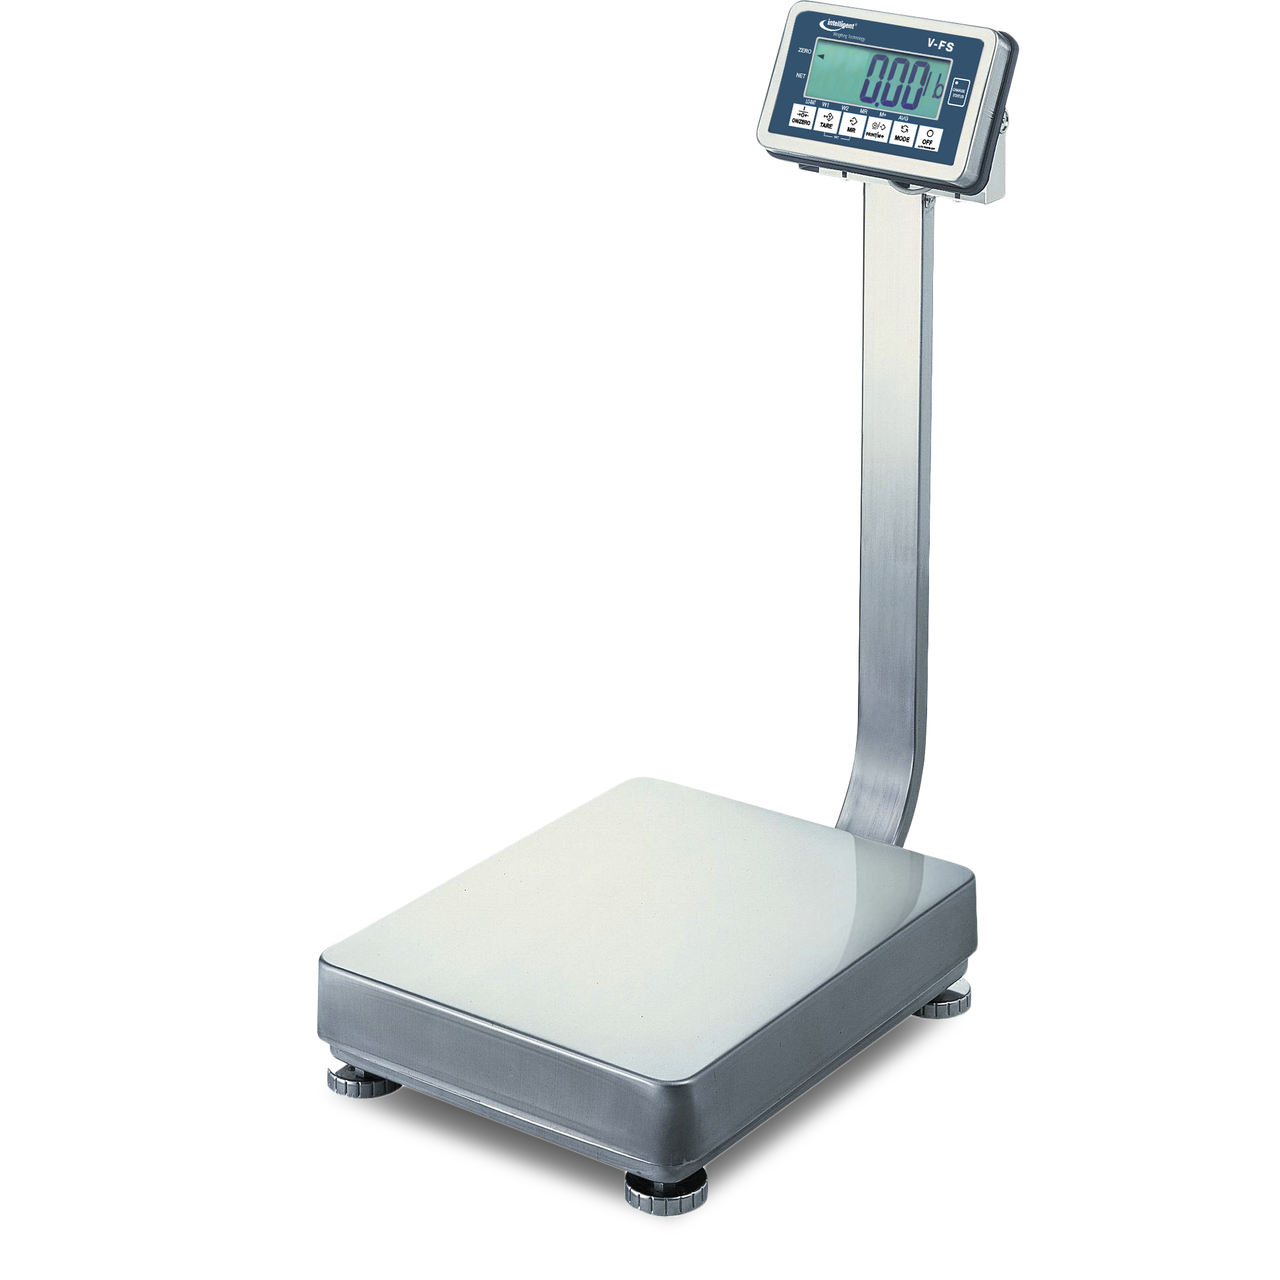 https://cdn11.bigcommerce.com/s-bhwahaygys/images/stencil/1280x1280/products/6908/10318/products-intelligent-weighing-vfs-series-bench-scale__15012.1682093229.png?c=1